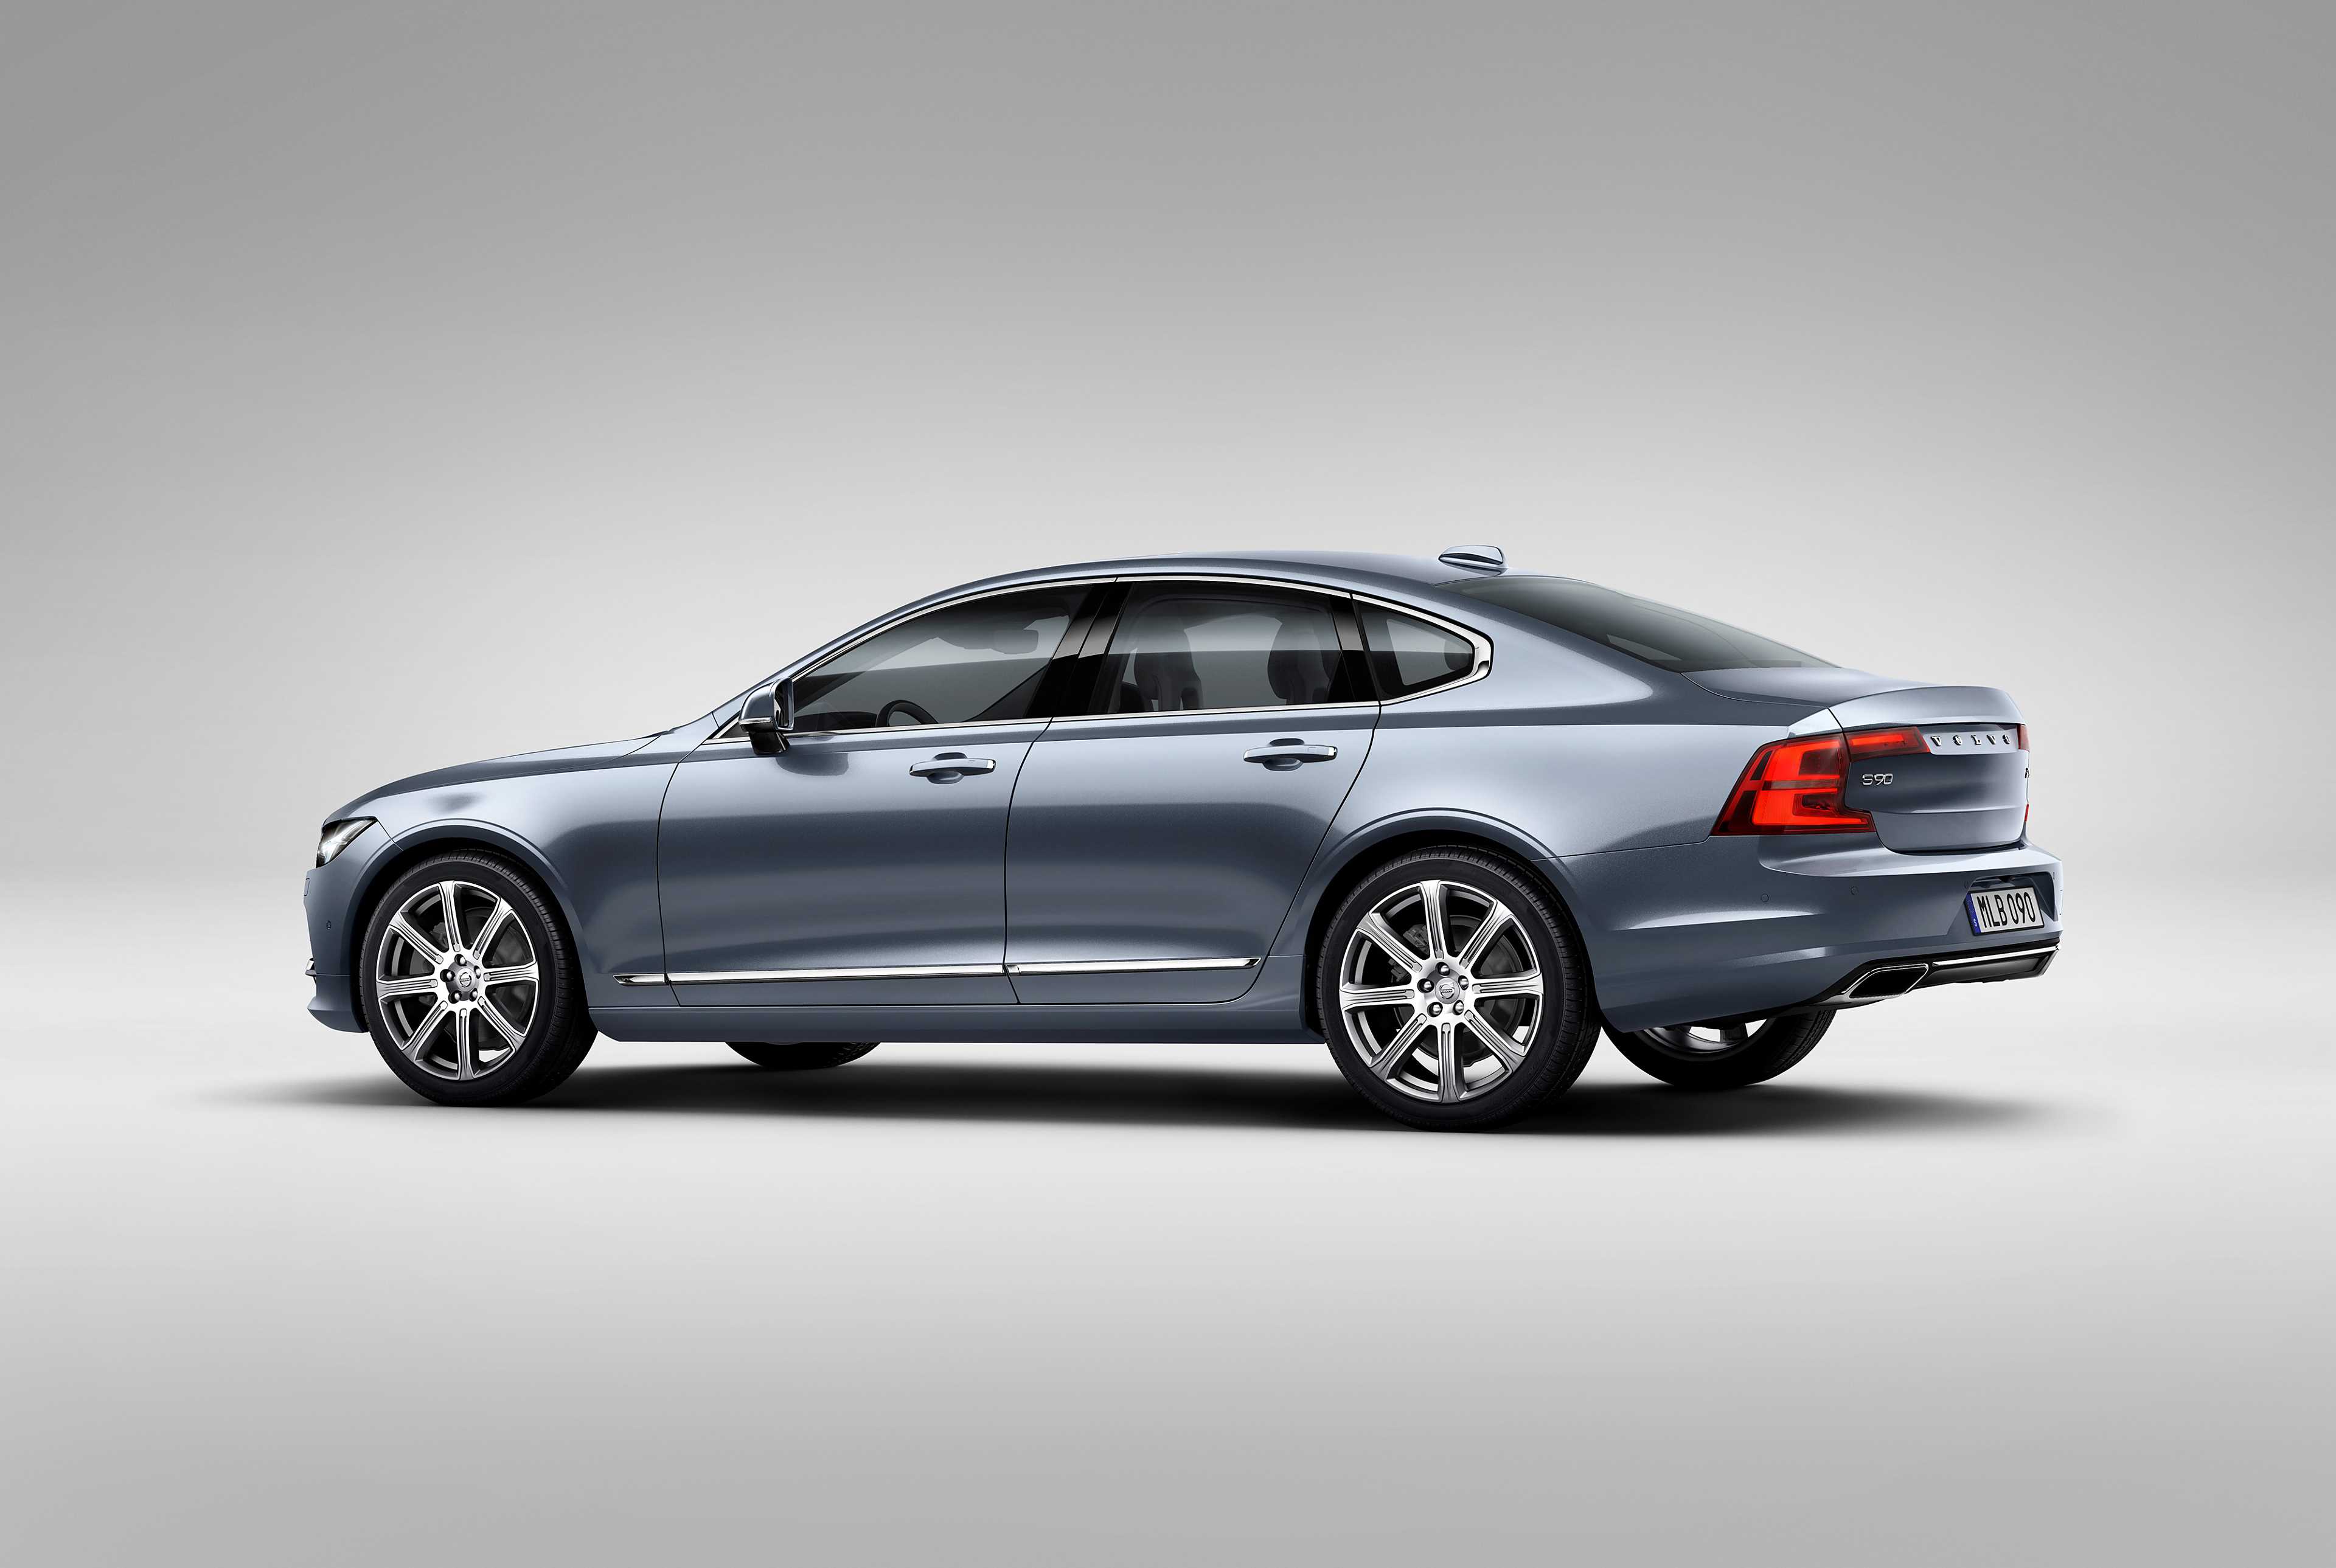 Fichiers Tuning Haute Qualité Volvo S90 / V90 2.0 T4 190hp